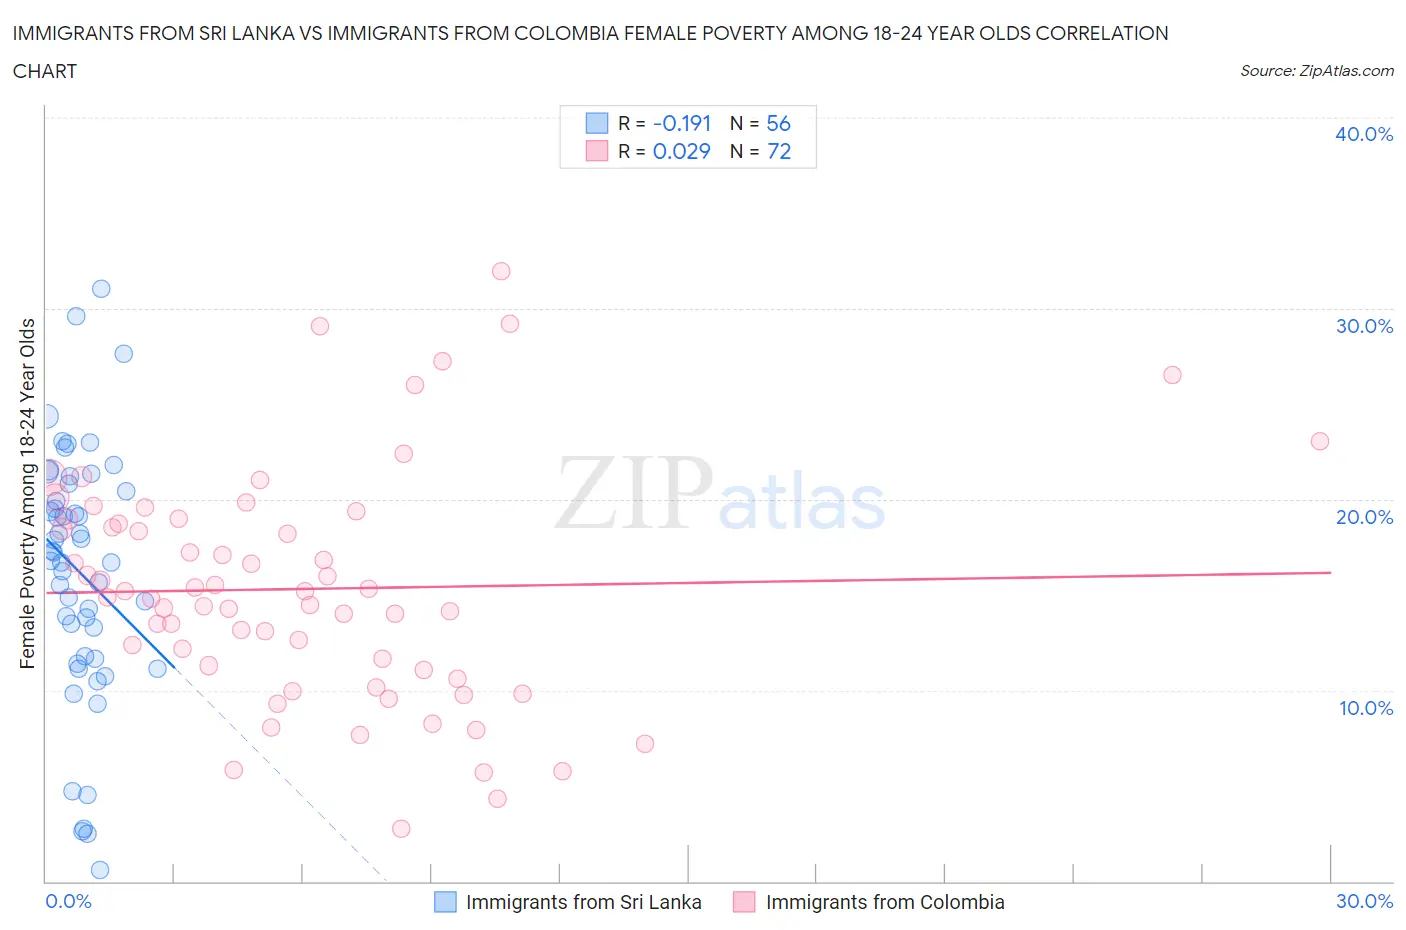 Immigrants from Sri Lanka vs Immigrants from Colombia Female Poverty Among 18-24 Year Olds